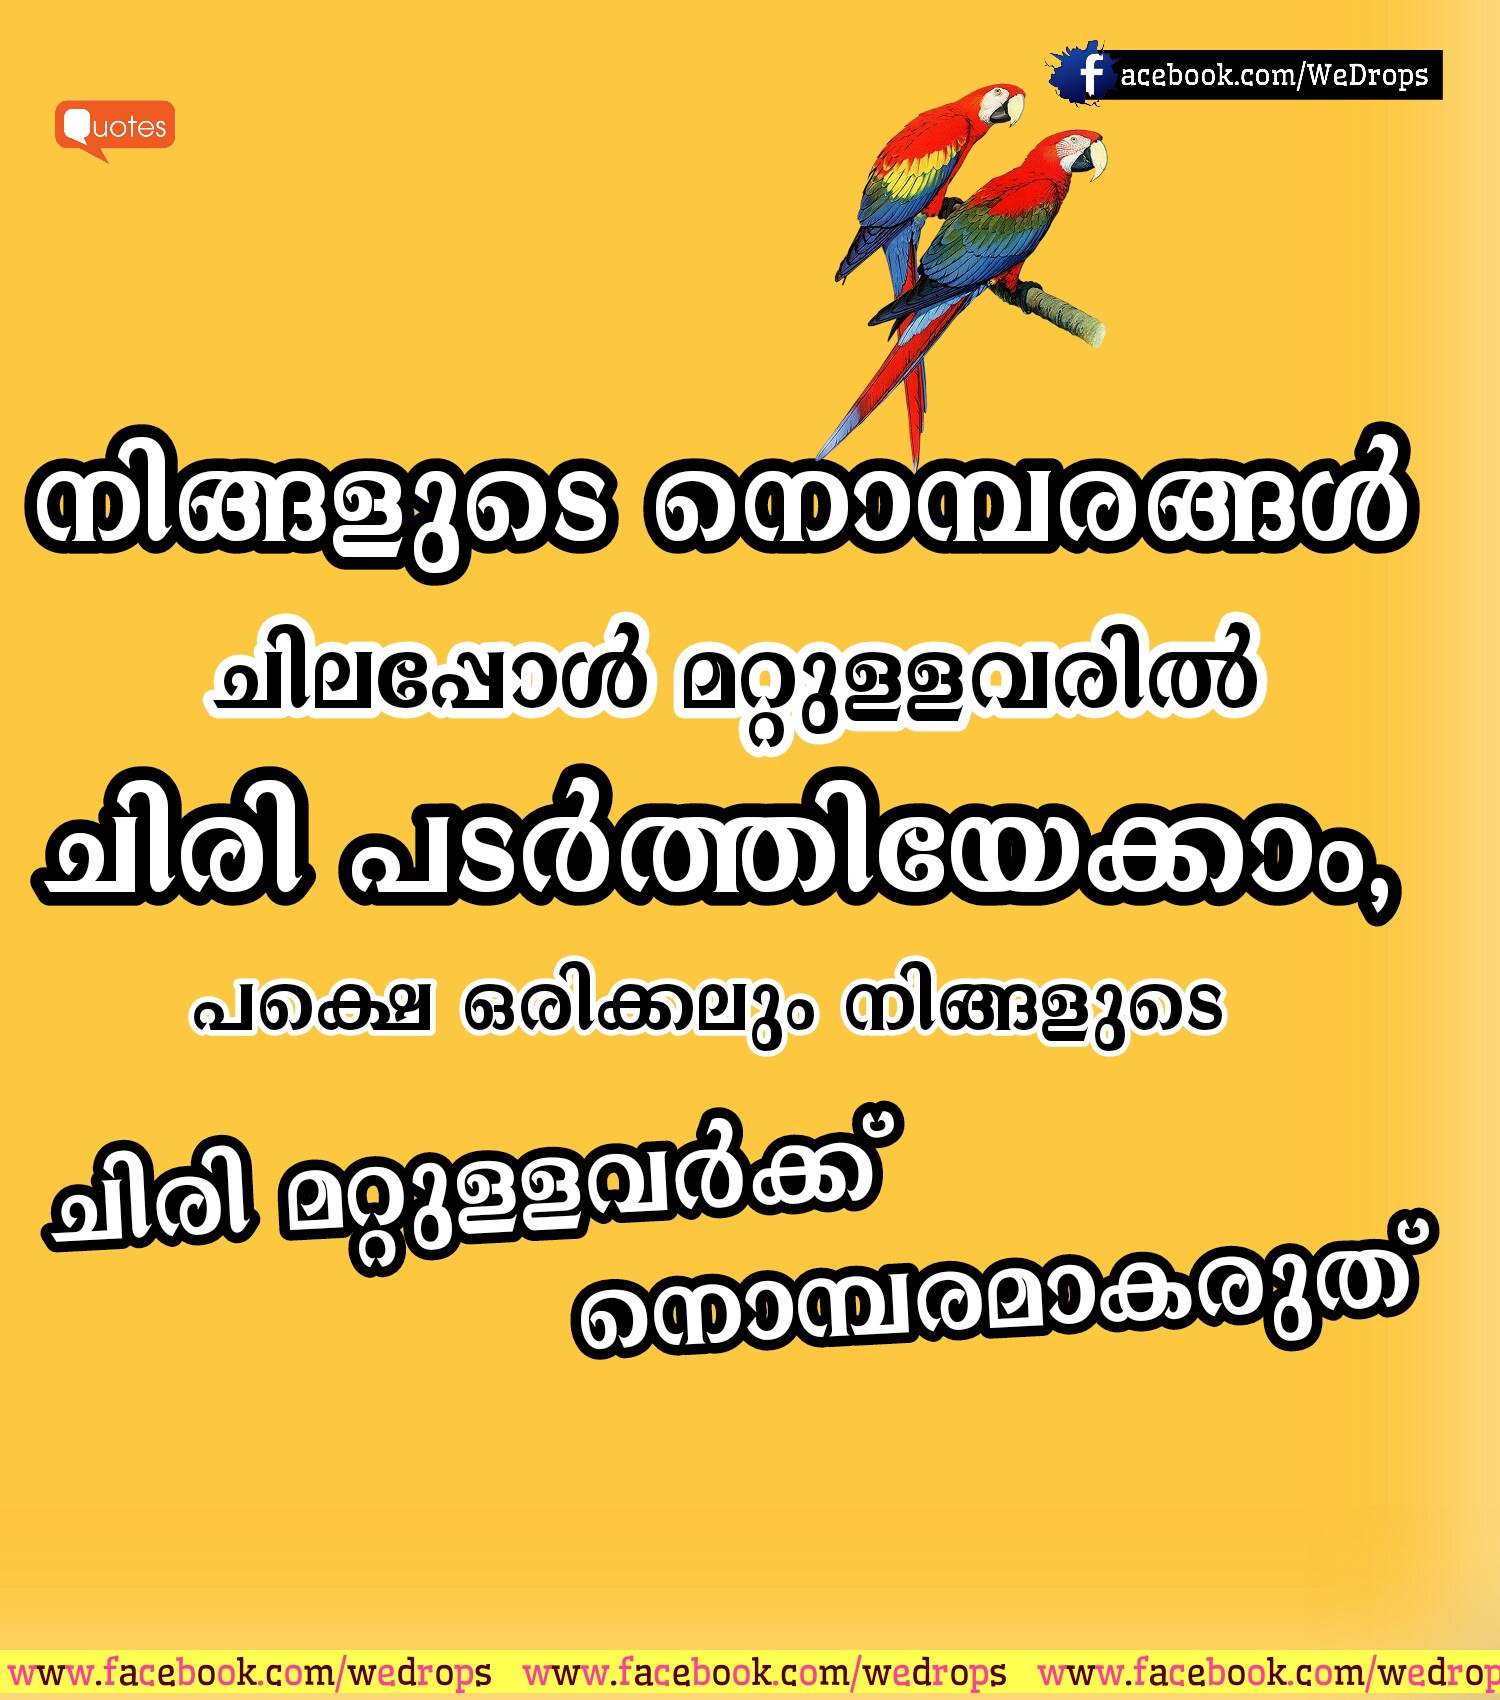 famous malayalam quotes about reading